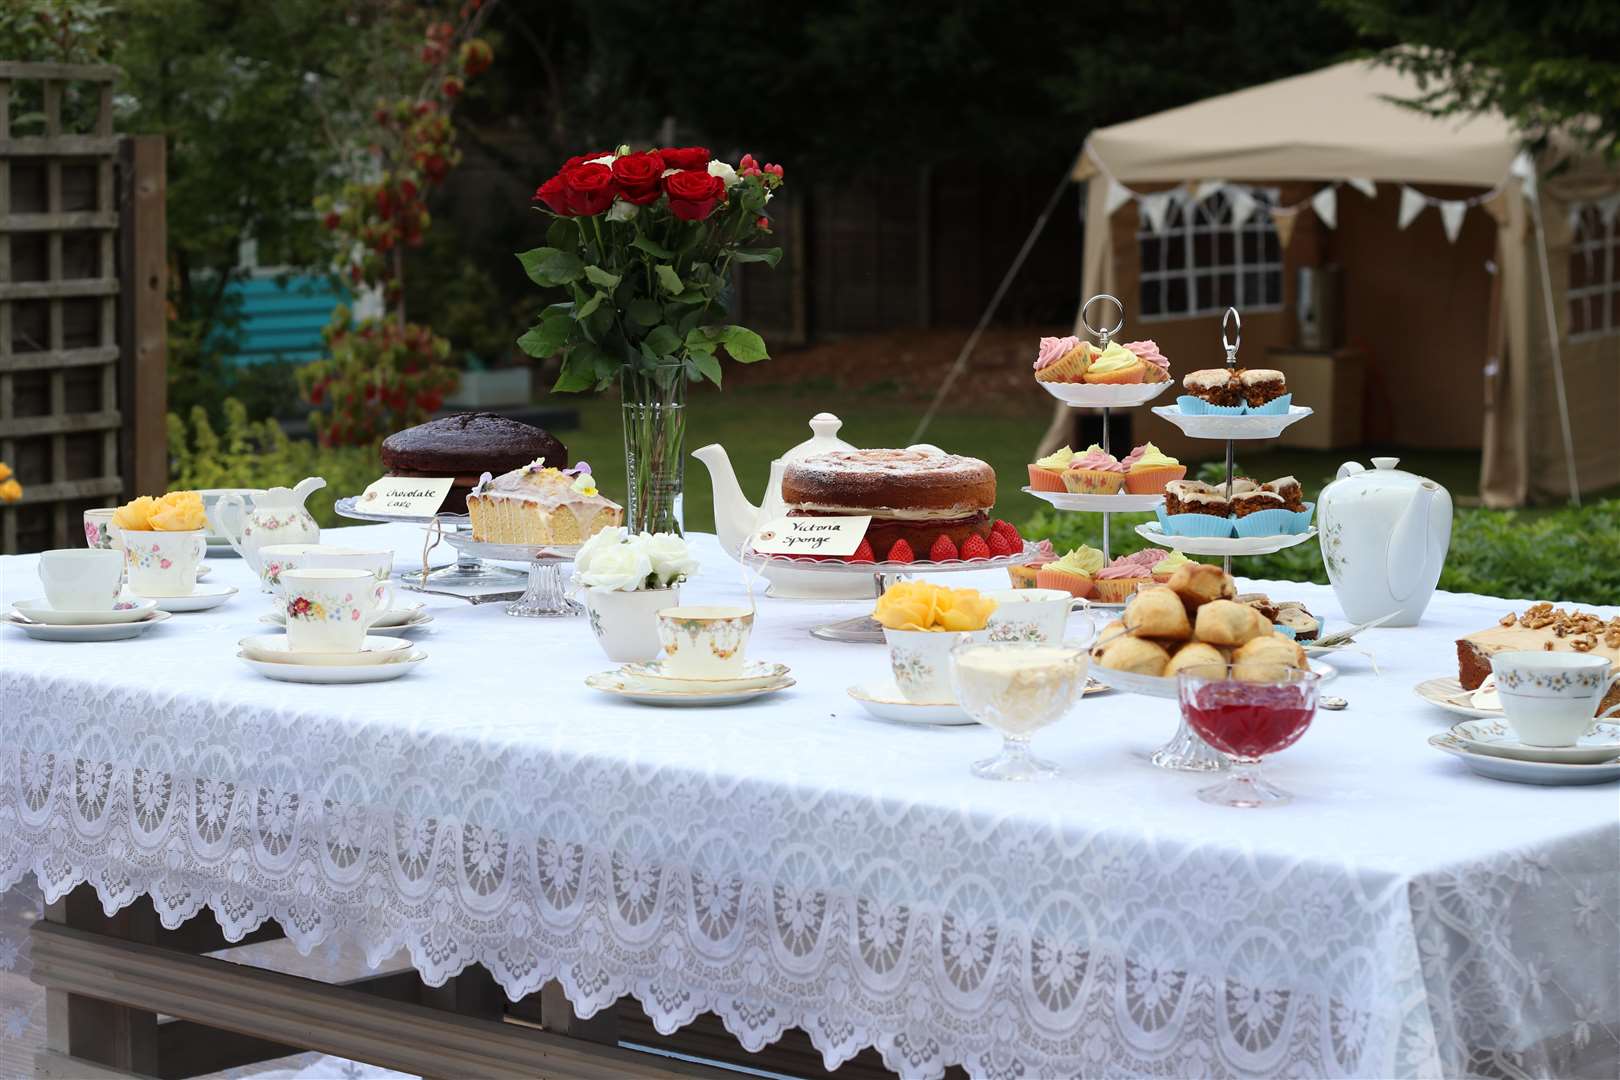 The business was set to compliment a wide range of special occasions, and serve sandwiches, homemade cakes and Prosecco